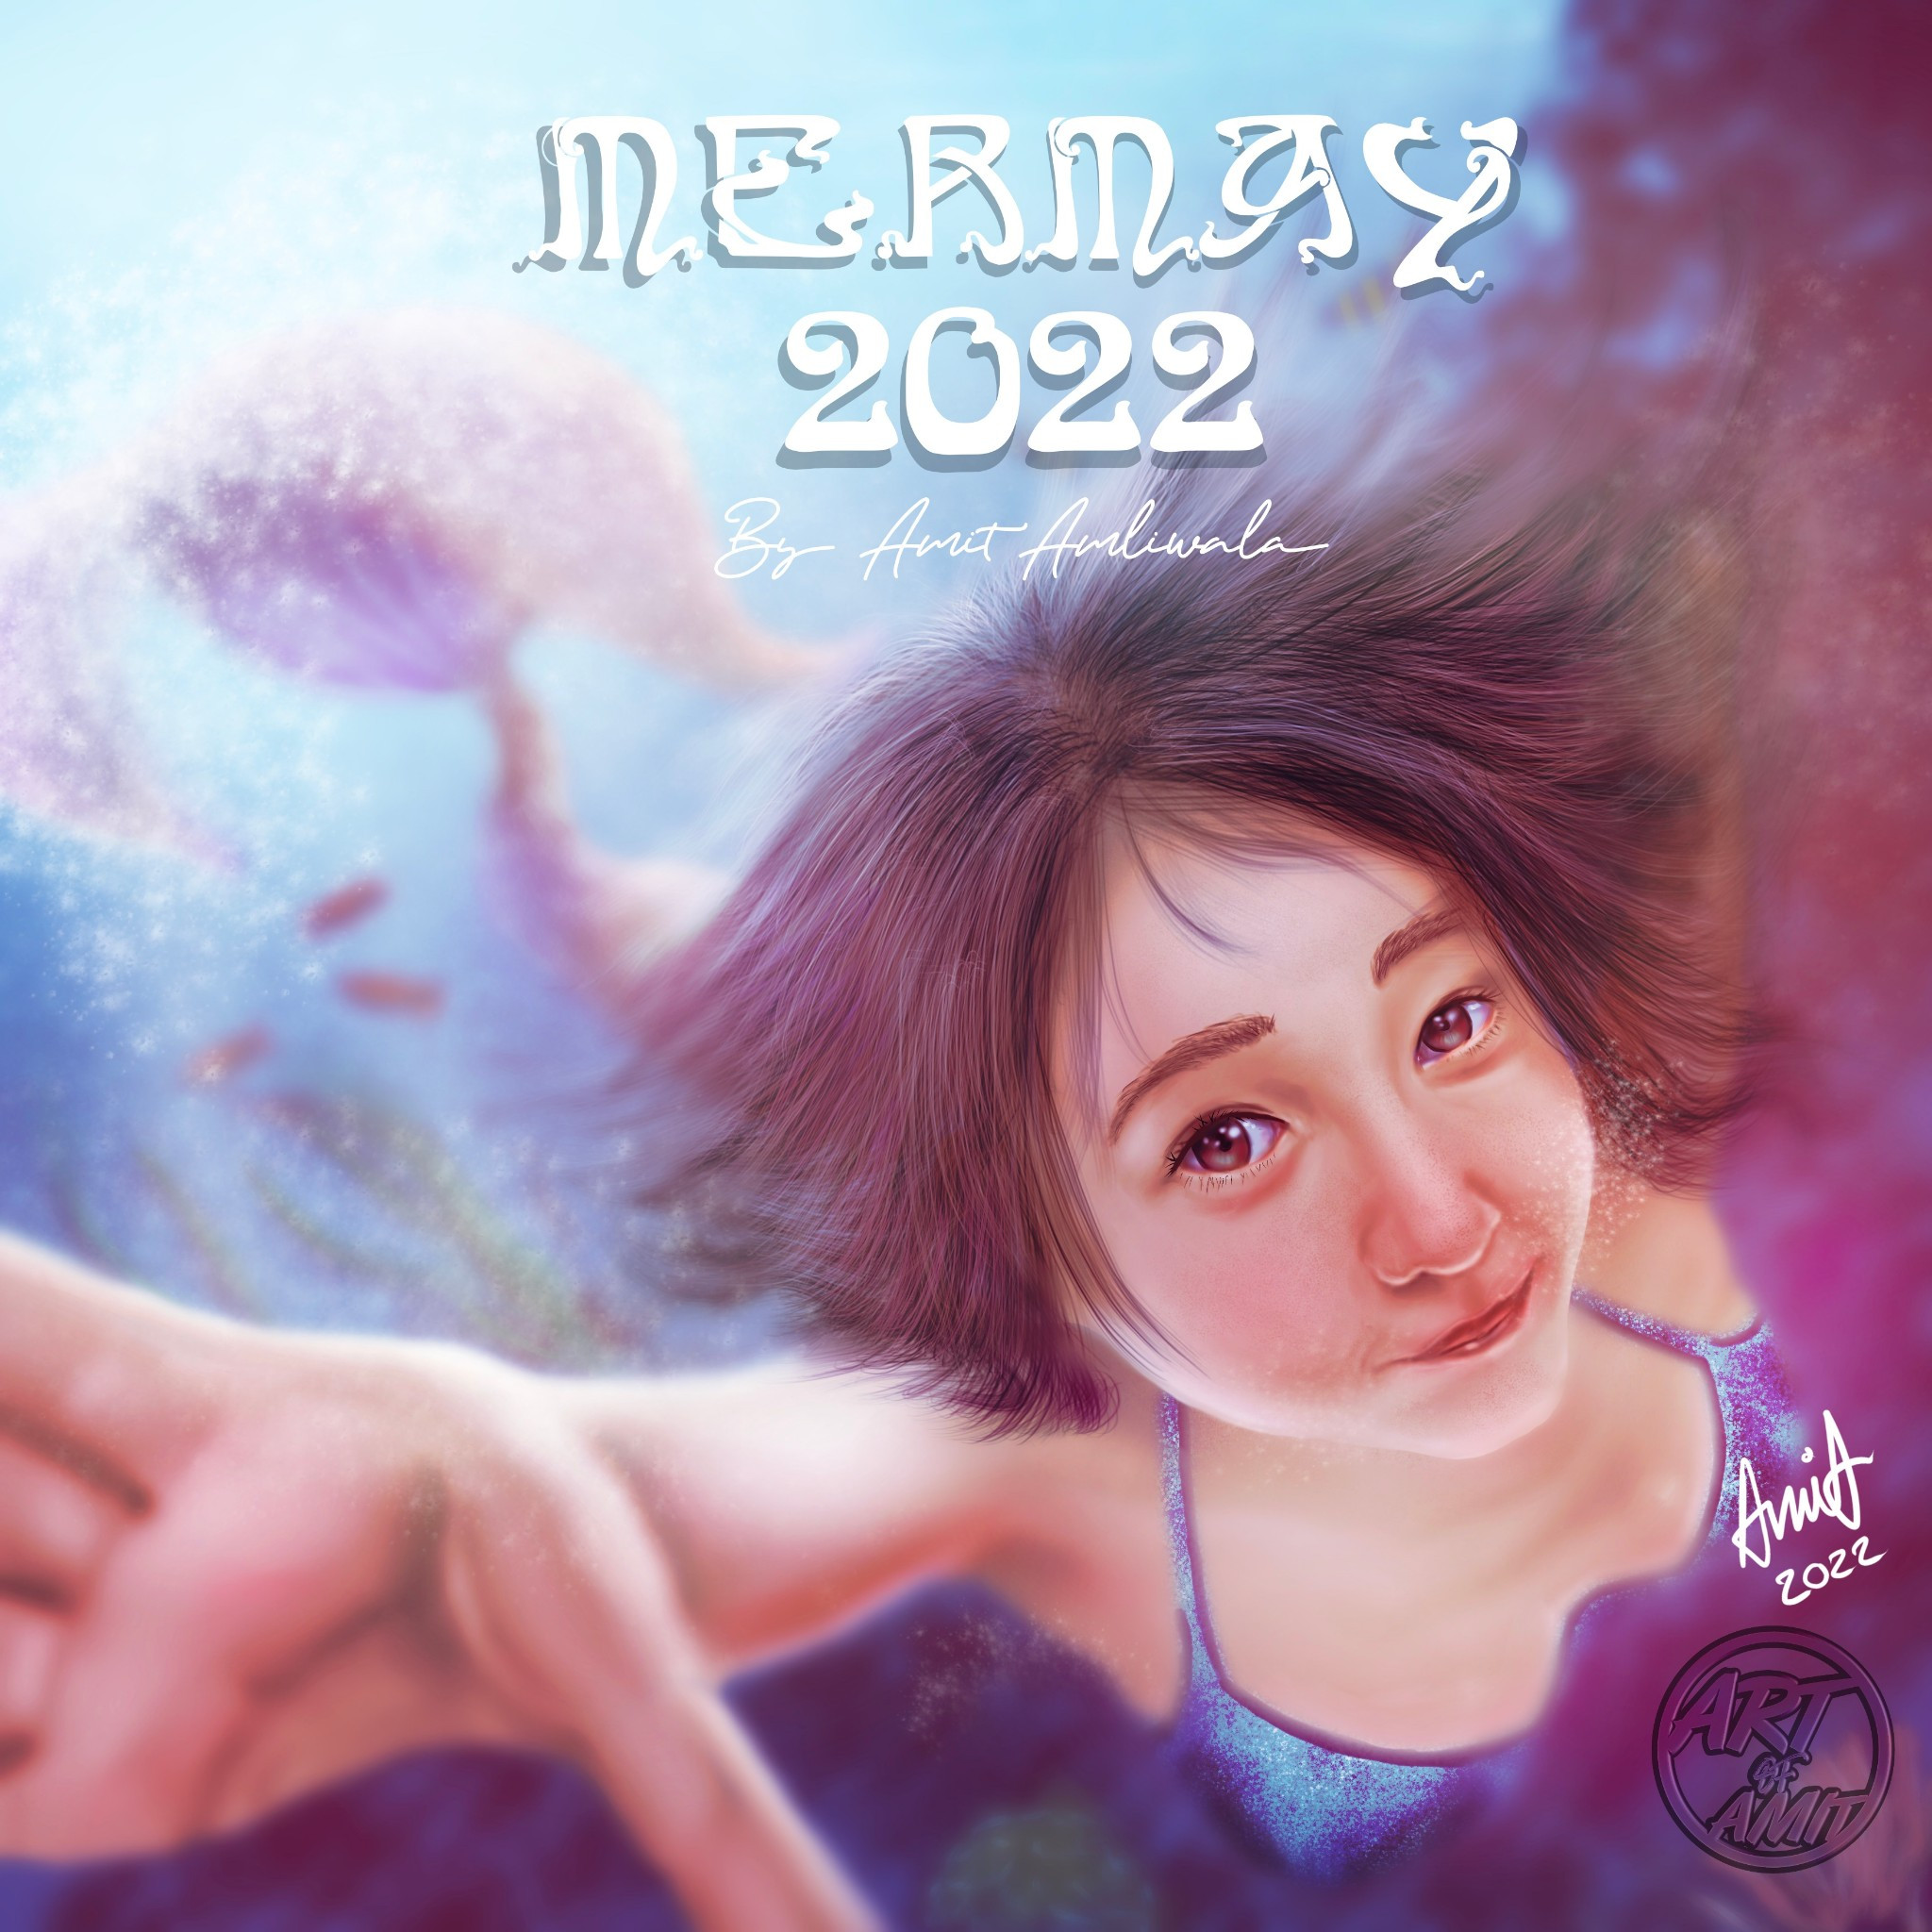 My submission for Mermay 2022